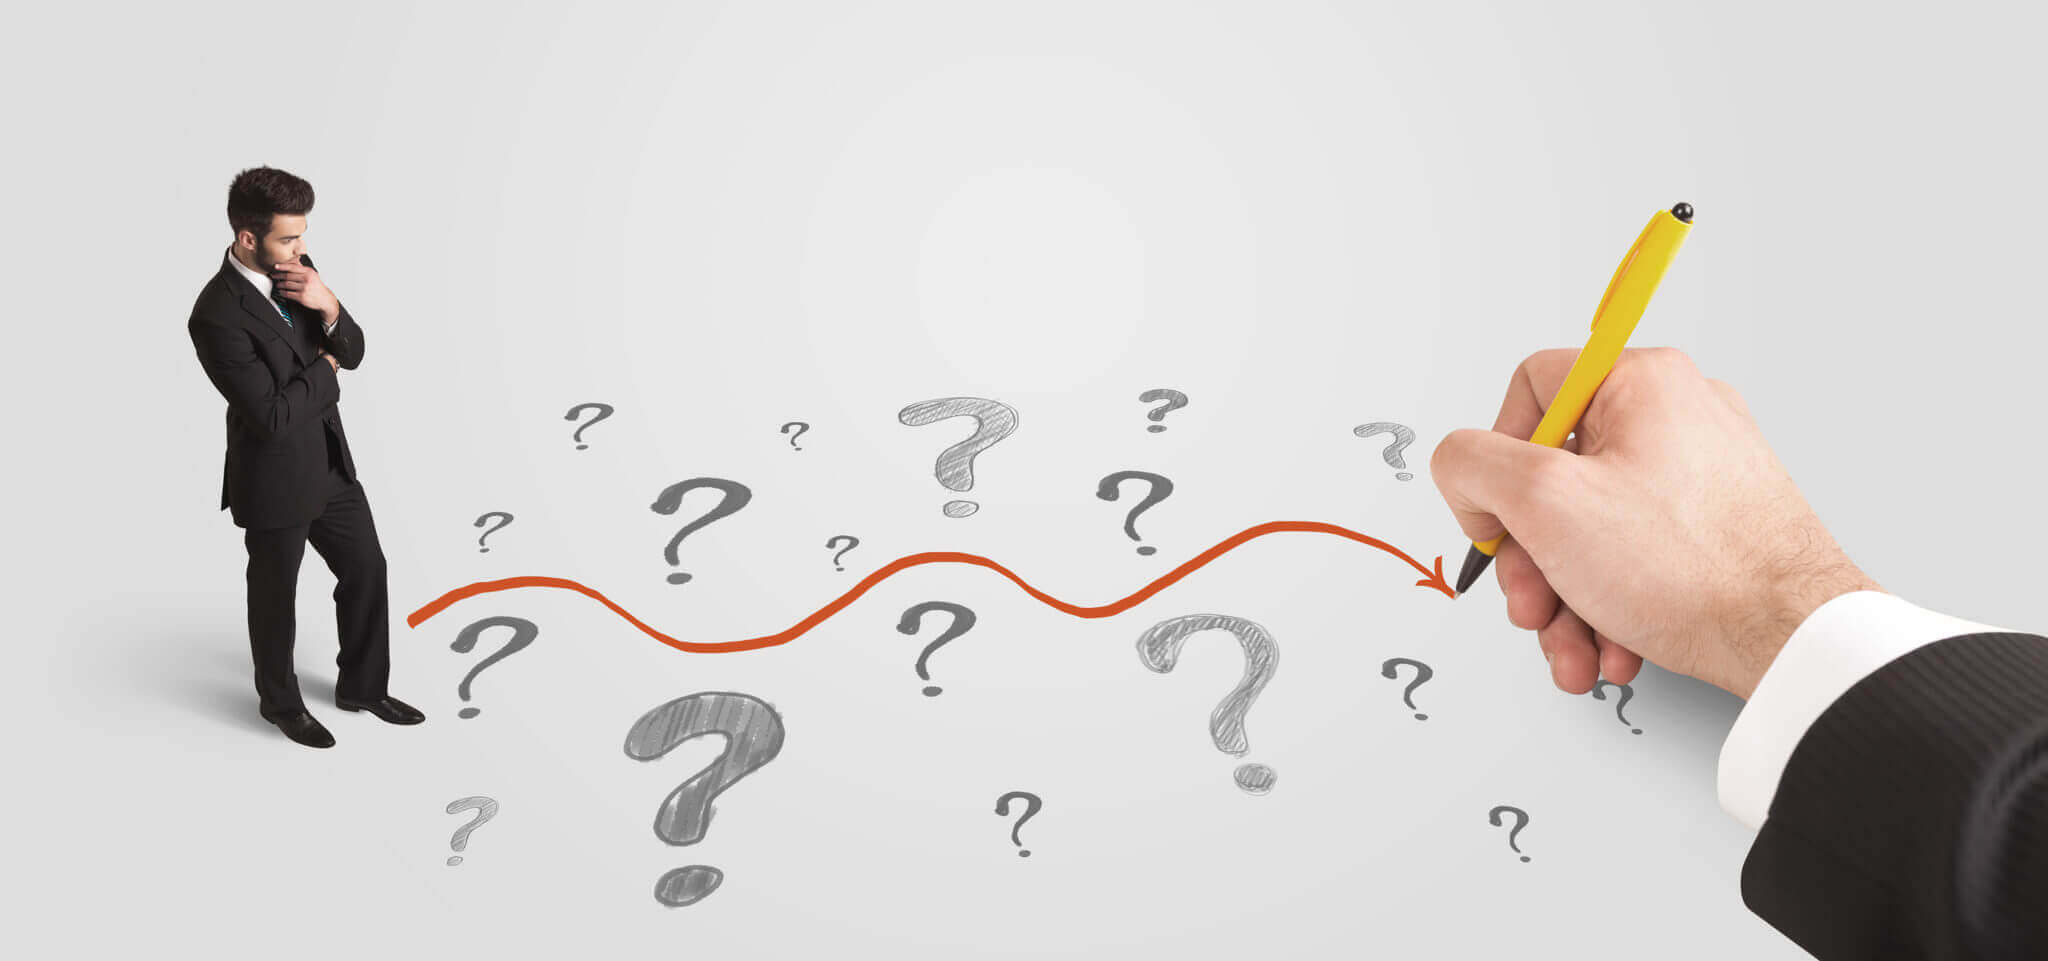 5 revenue management questions independent hoteliers should ask